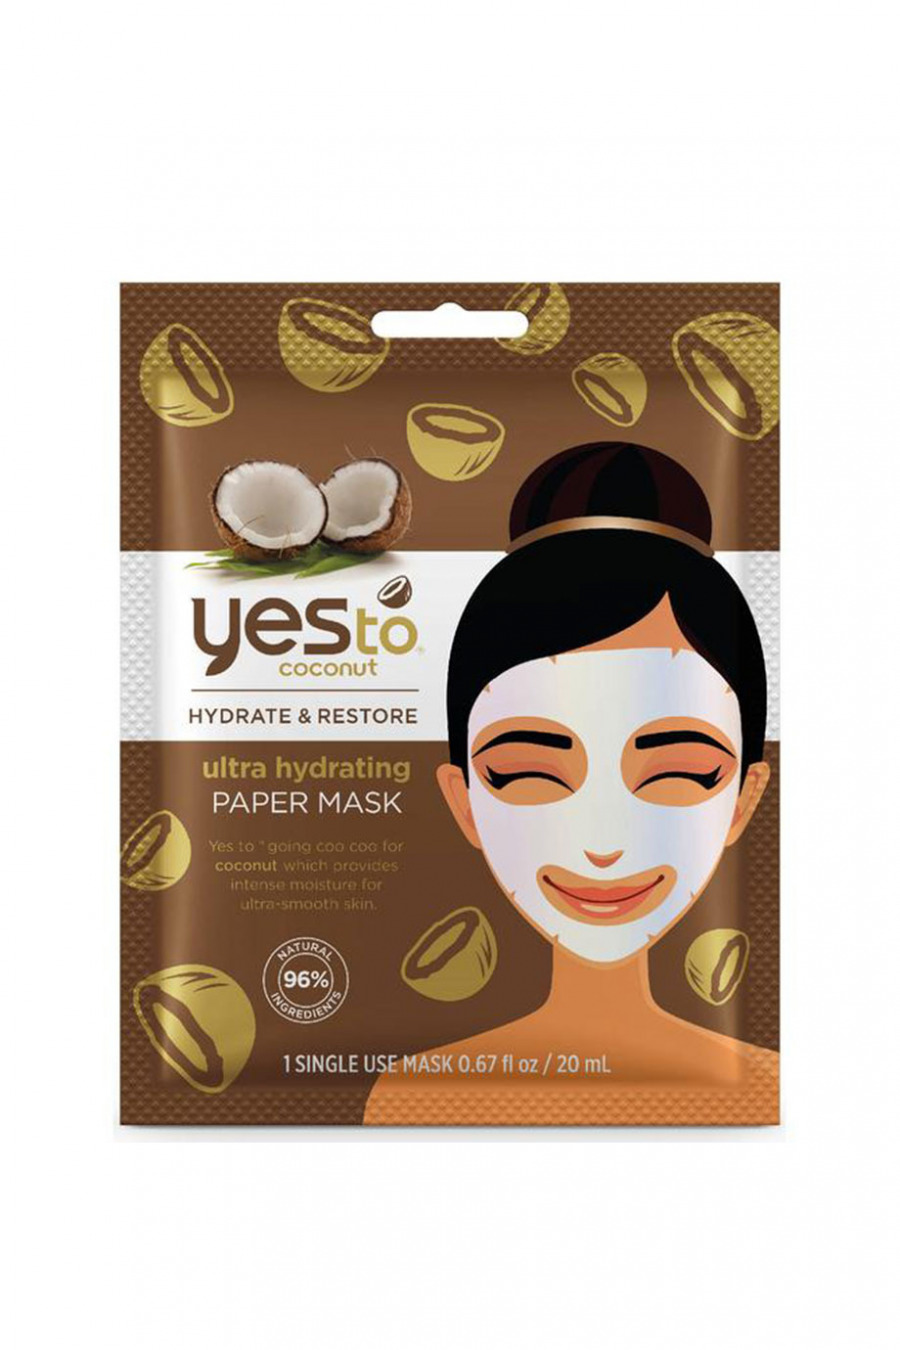 Yes To Coconut, Ultra Hydrating Paper Mask